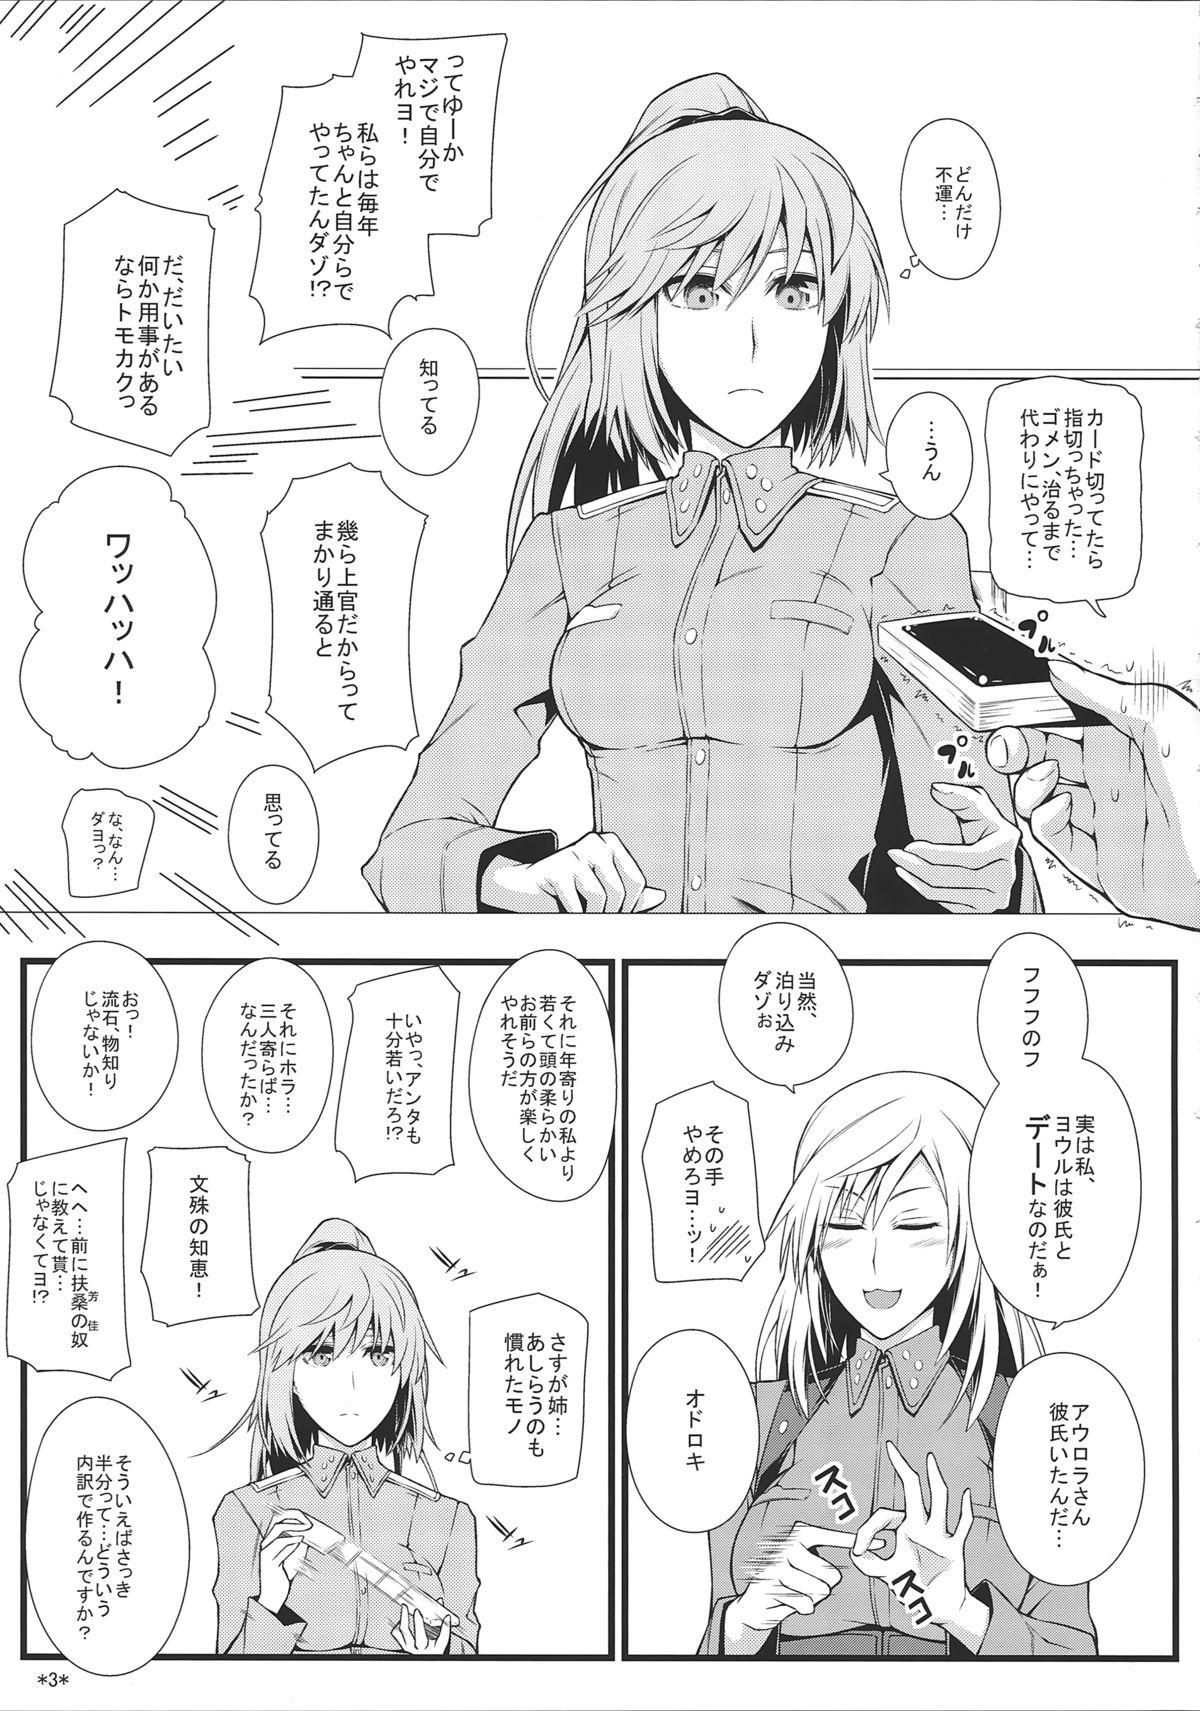 Lima KARLSLAND SYNDROME 3 - Strike witches Pregnant - Page 5